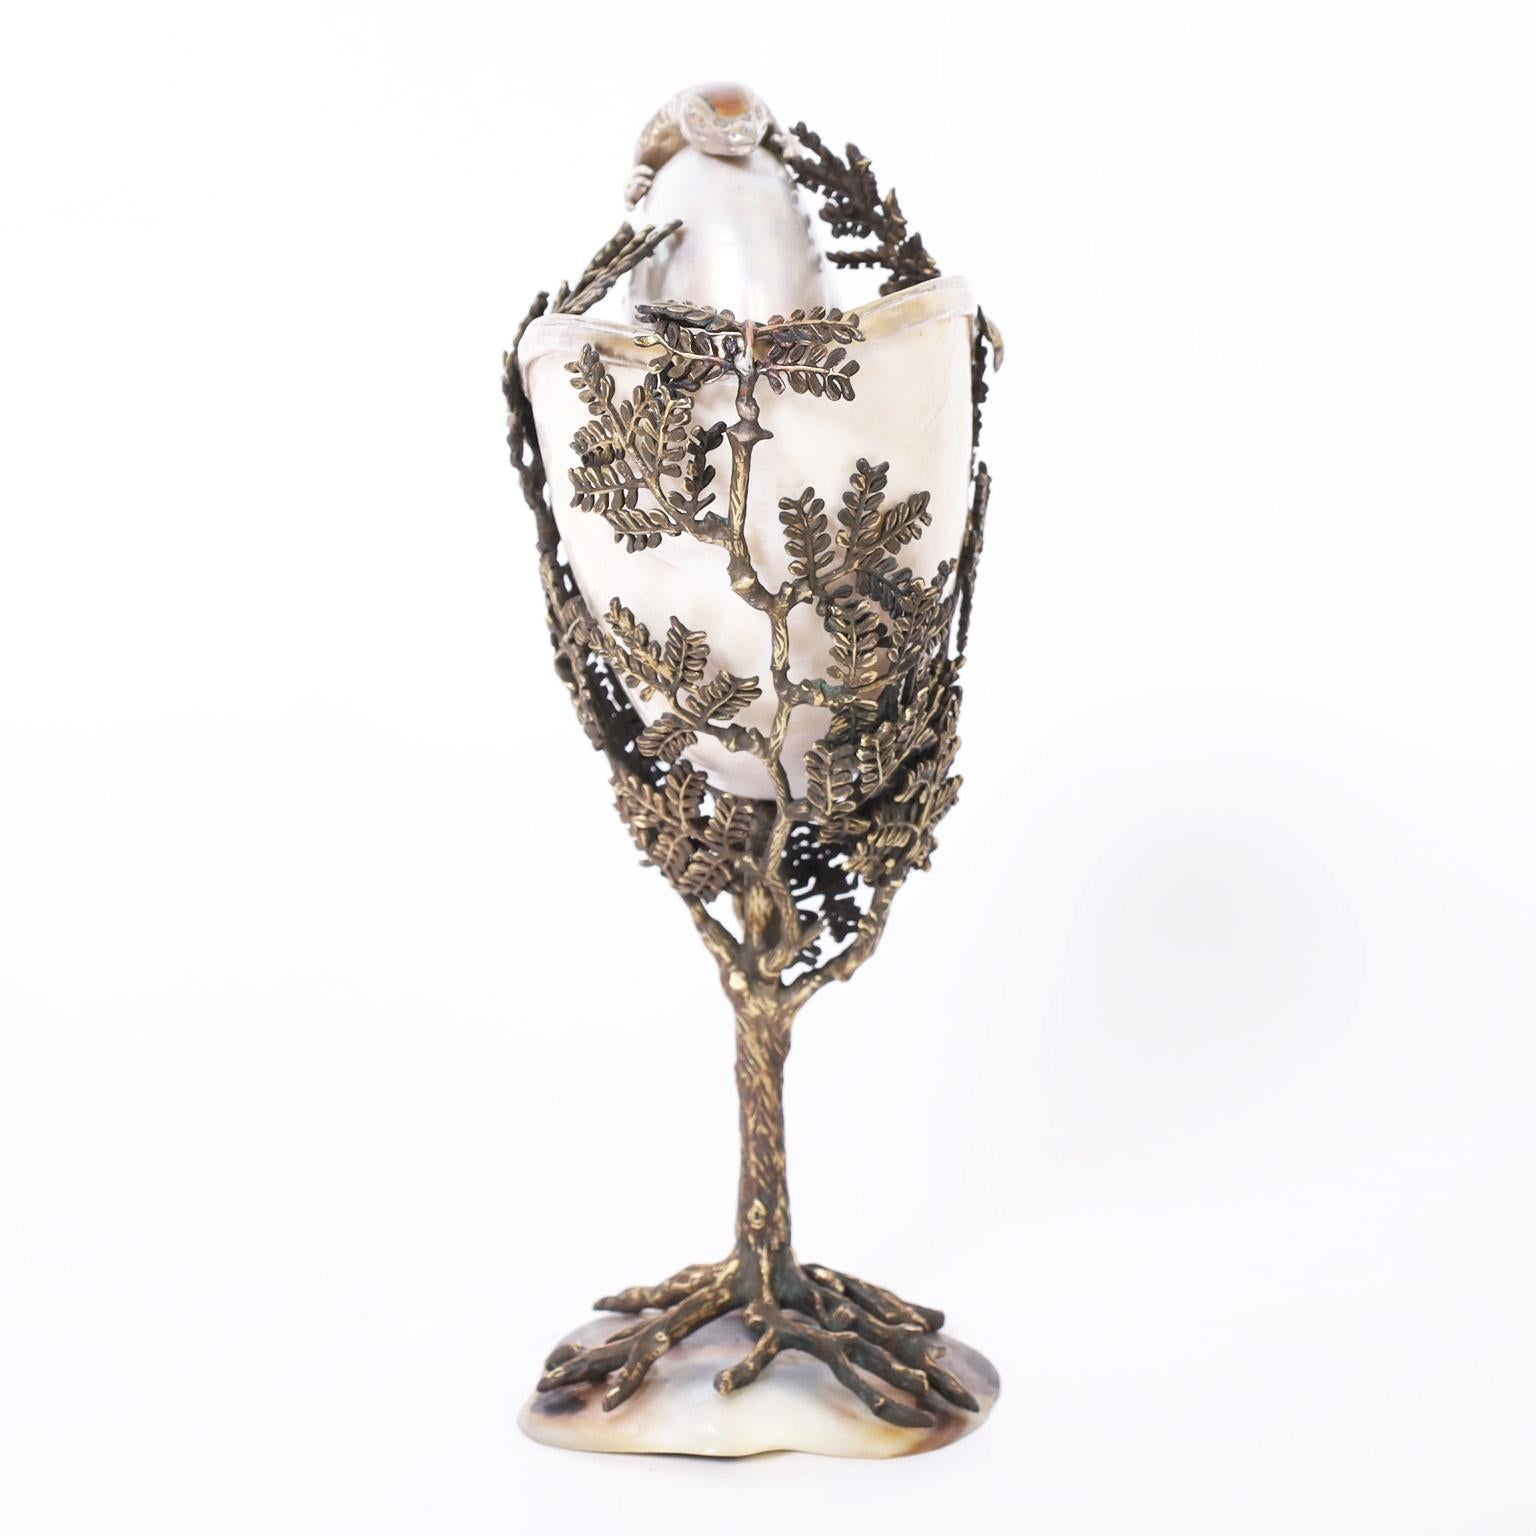 Intriguing vintage object of art with an eccentric composition having an organic nautilus shell in a cast metal tree on a penshell base featuring a silver plate lizard with a tortoise shell back.